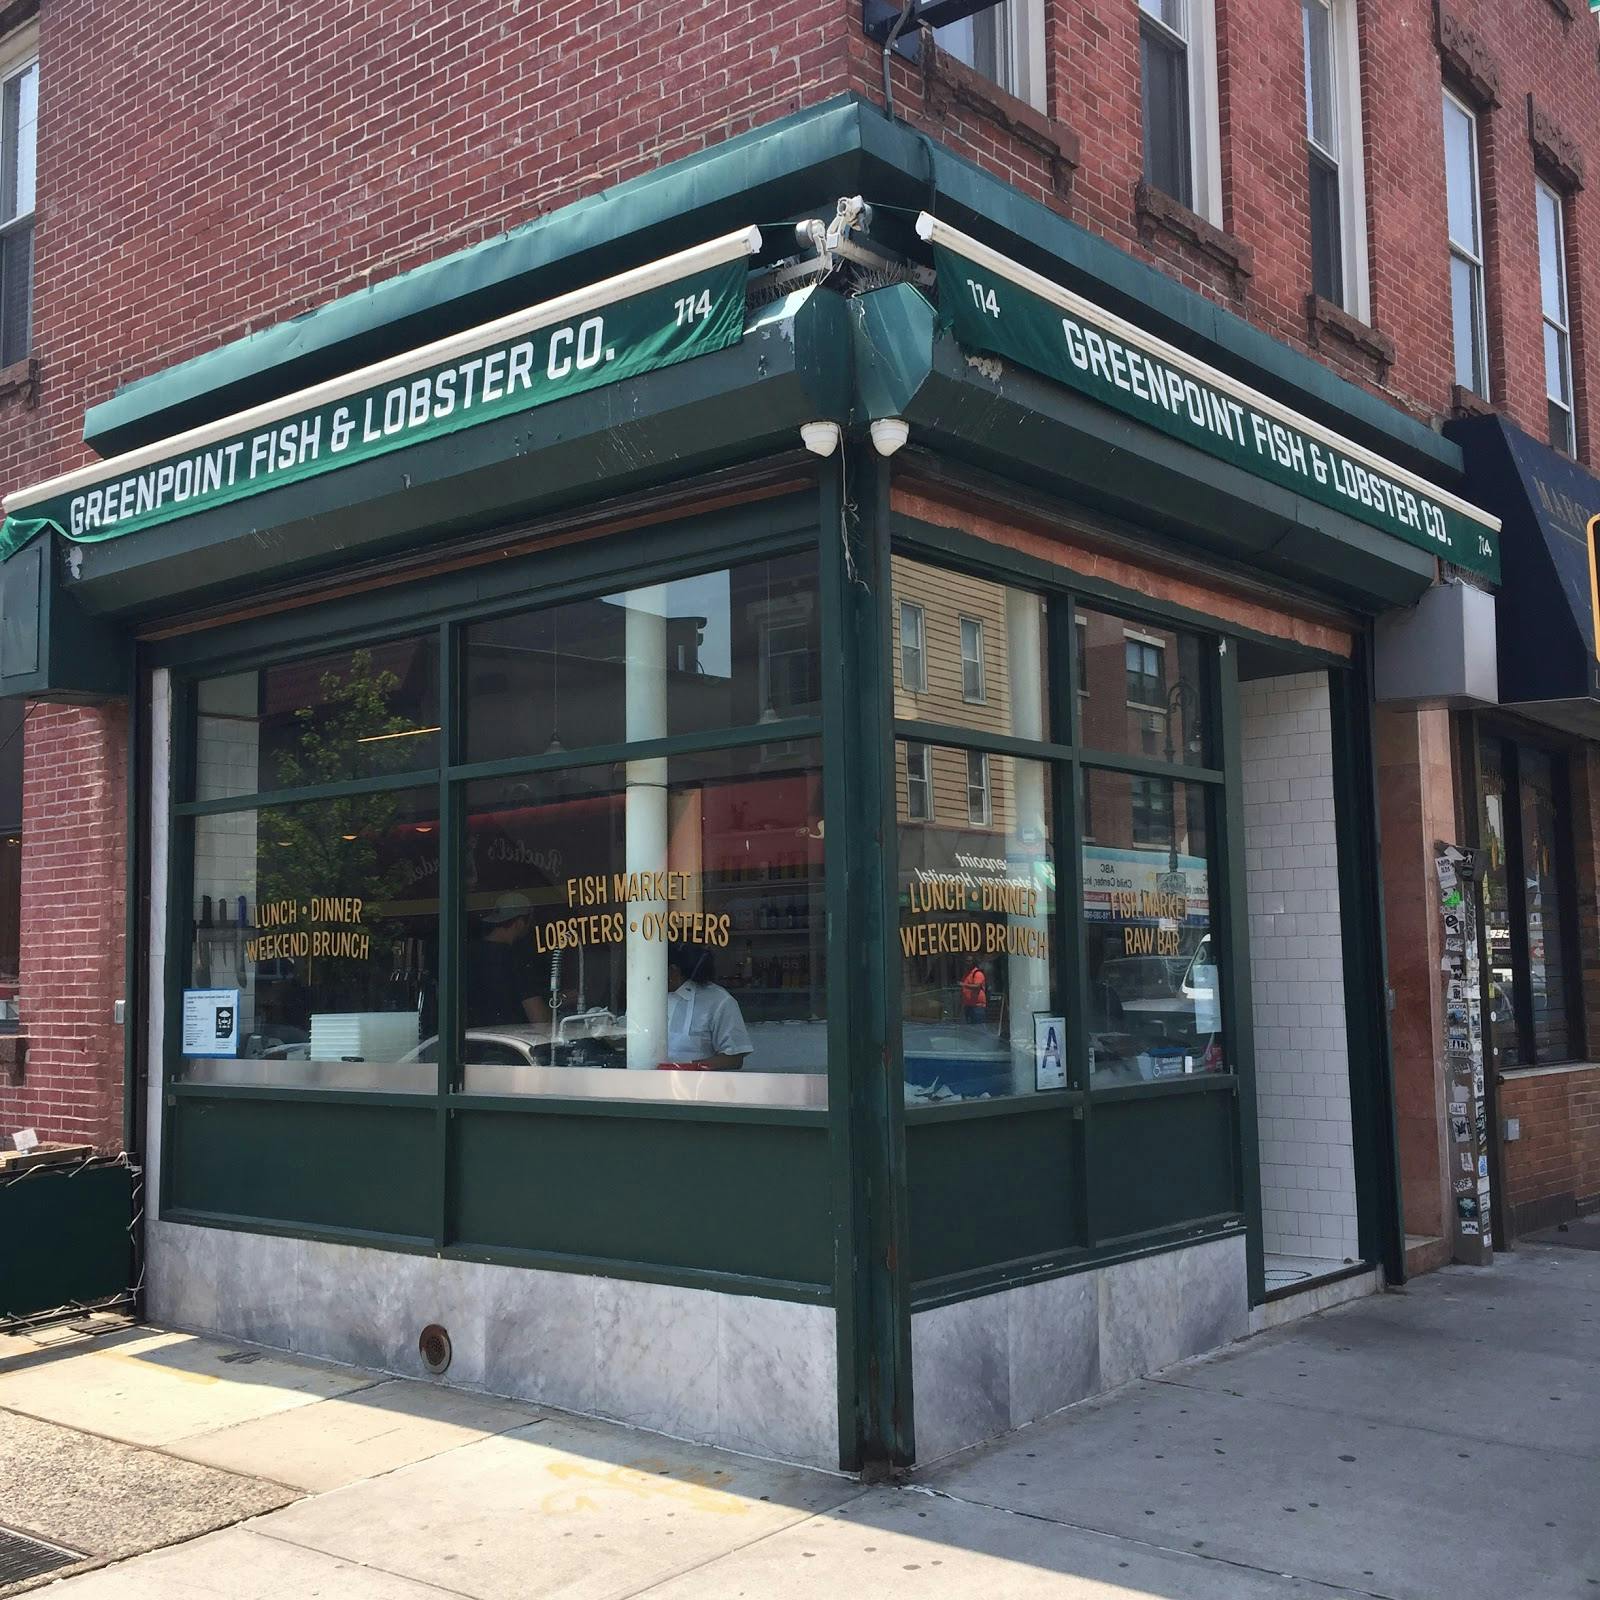 Image - Greenpoint Fish & Lobster Co.